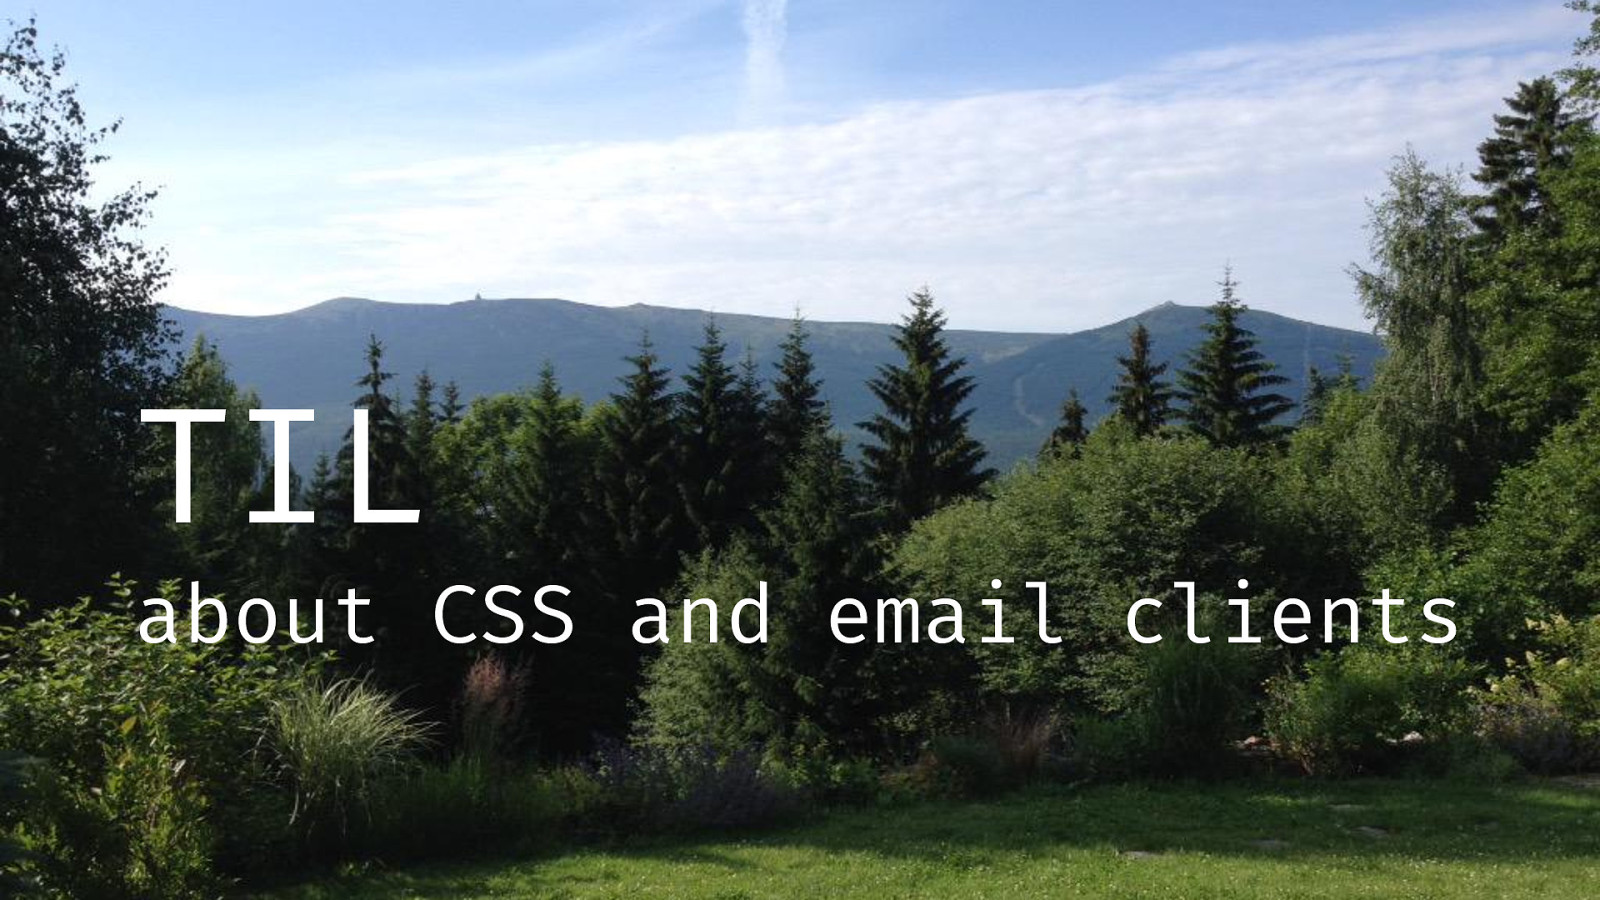 TIL about CSS and email clients